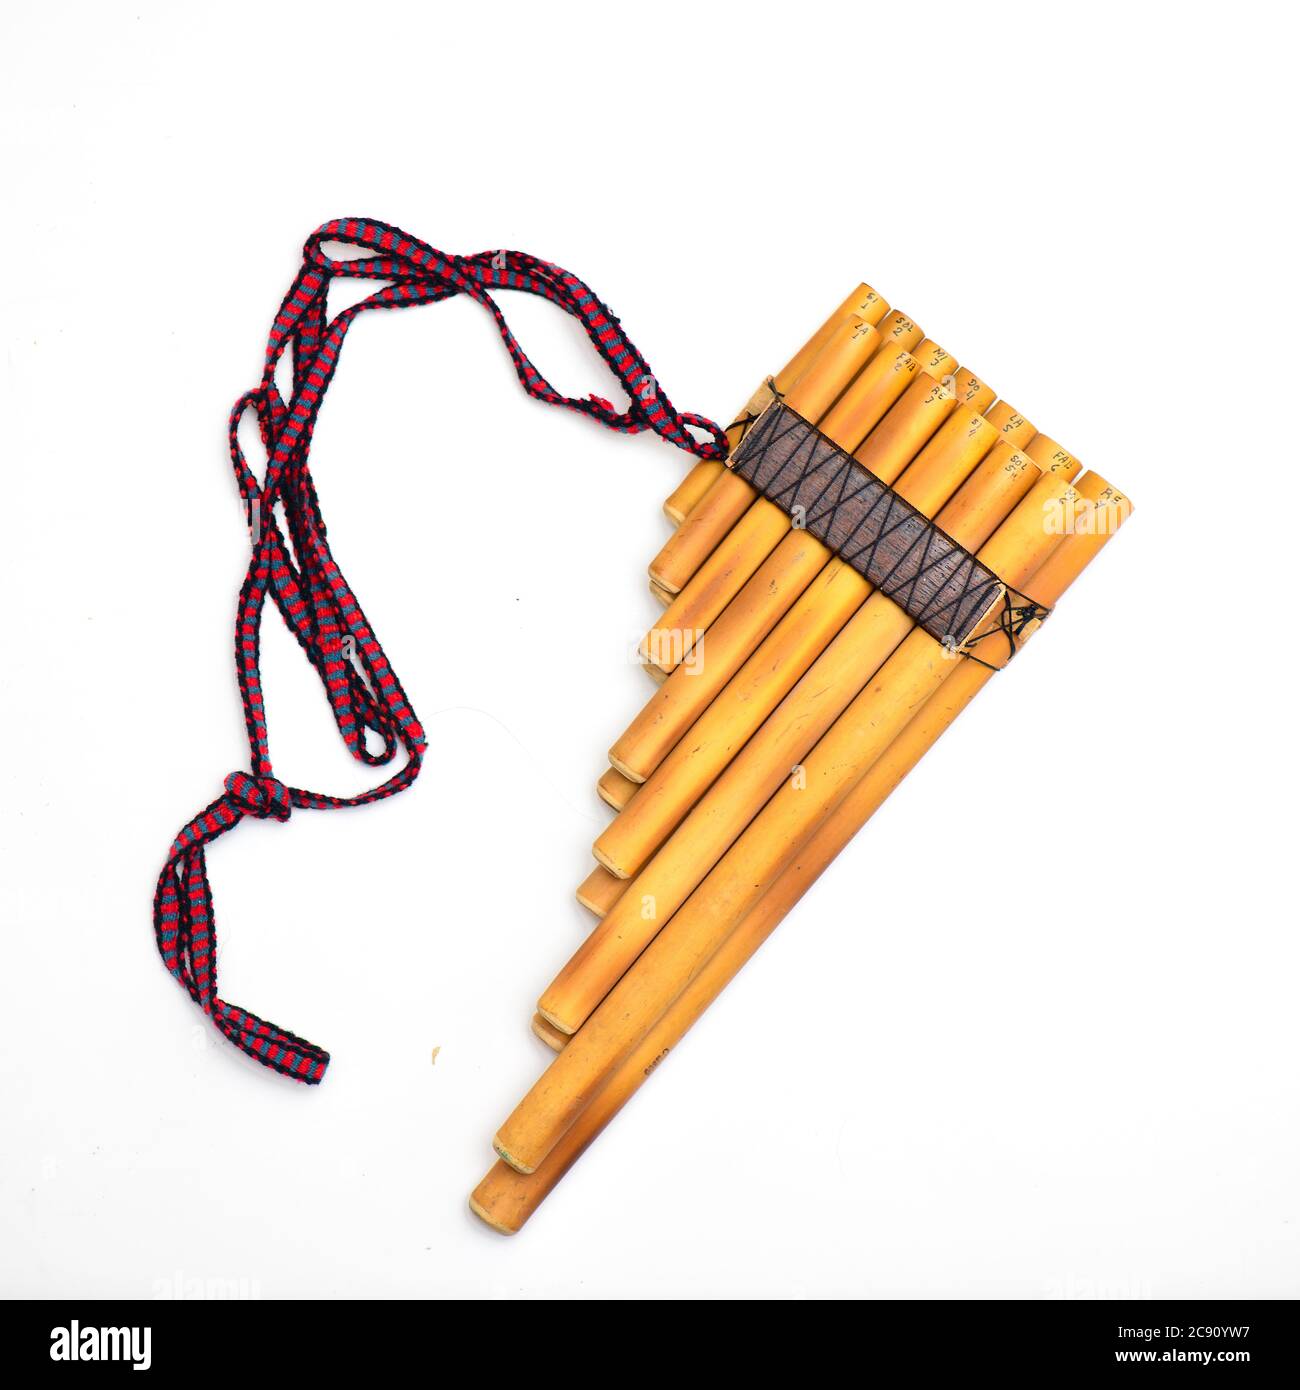 Pan flute andean wind instrument on a white background Stock Photo - Alamy